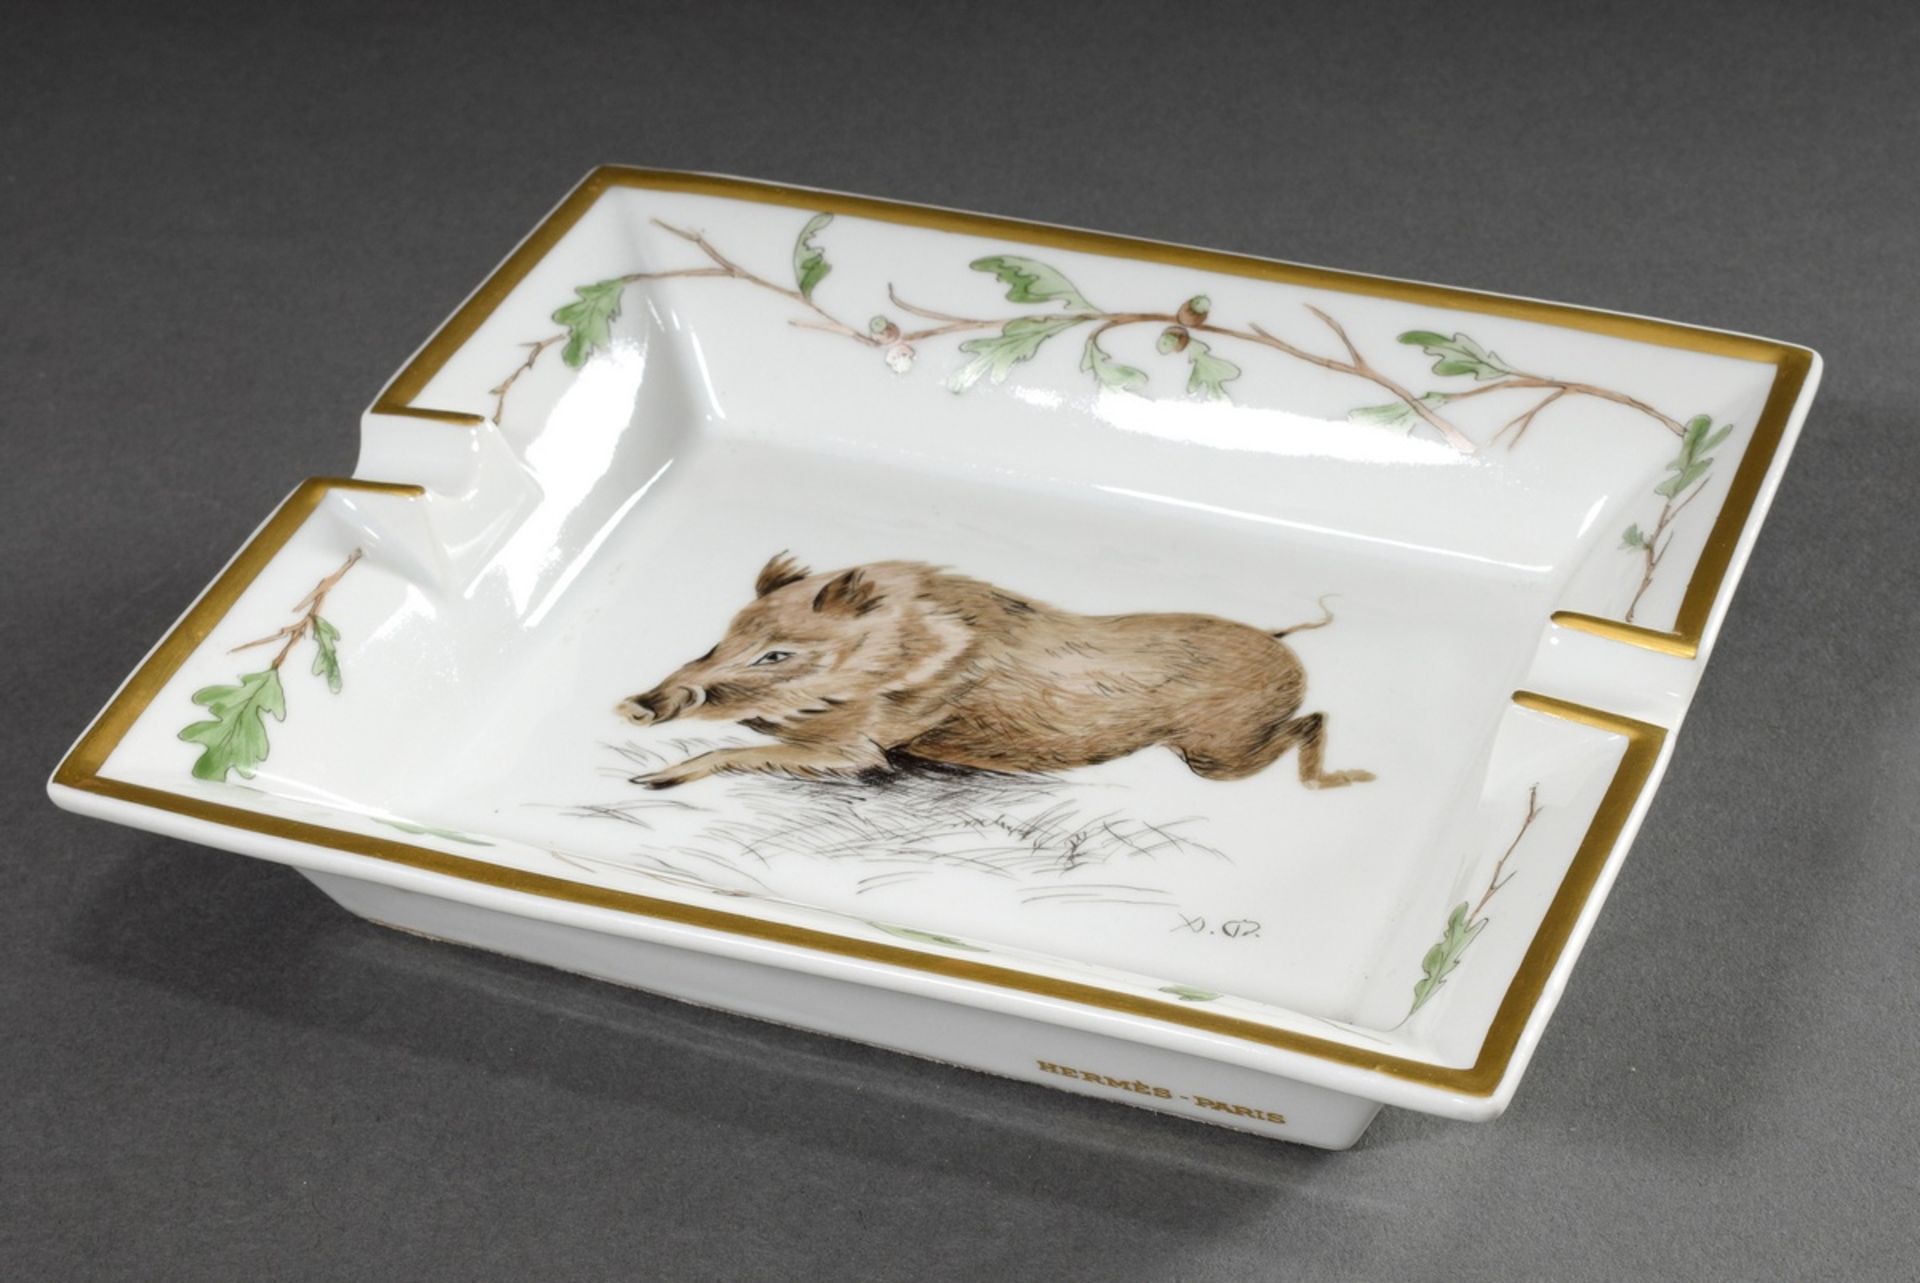 Hermès porcelain ashtray "Wild Boar with Oak Leaves", coloured print decoration, partly hand colour - Image 2 of 6